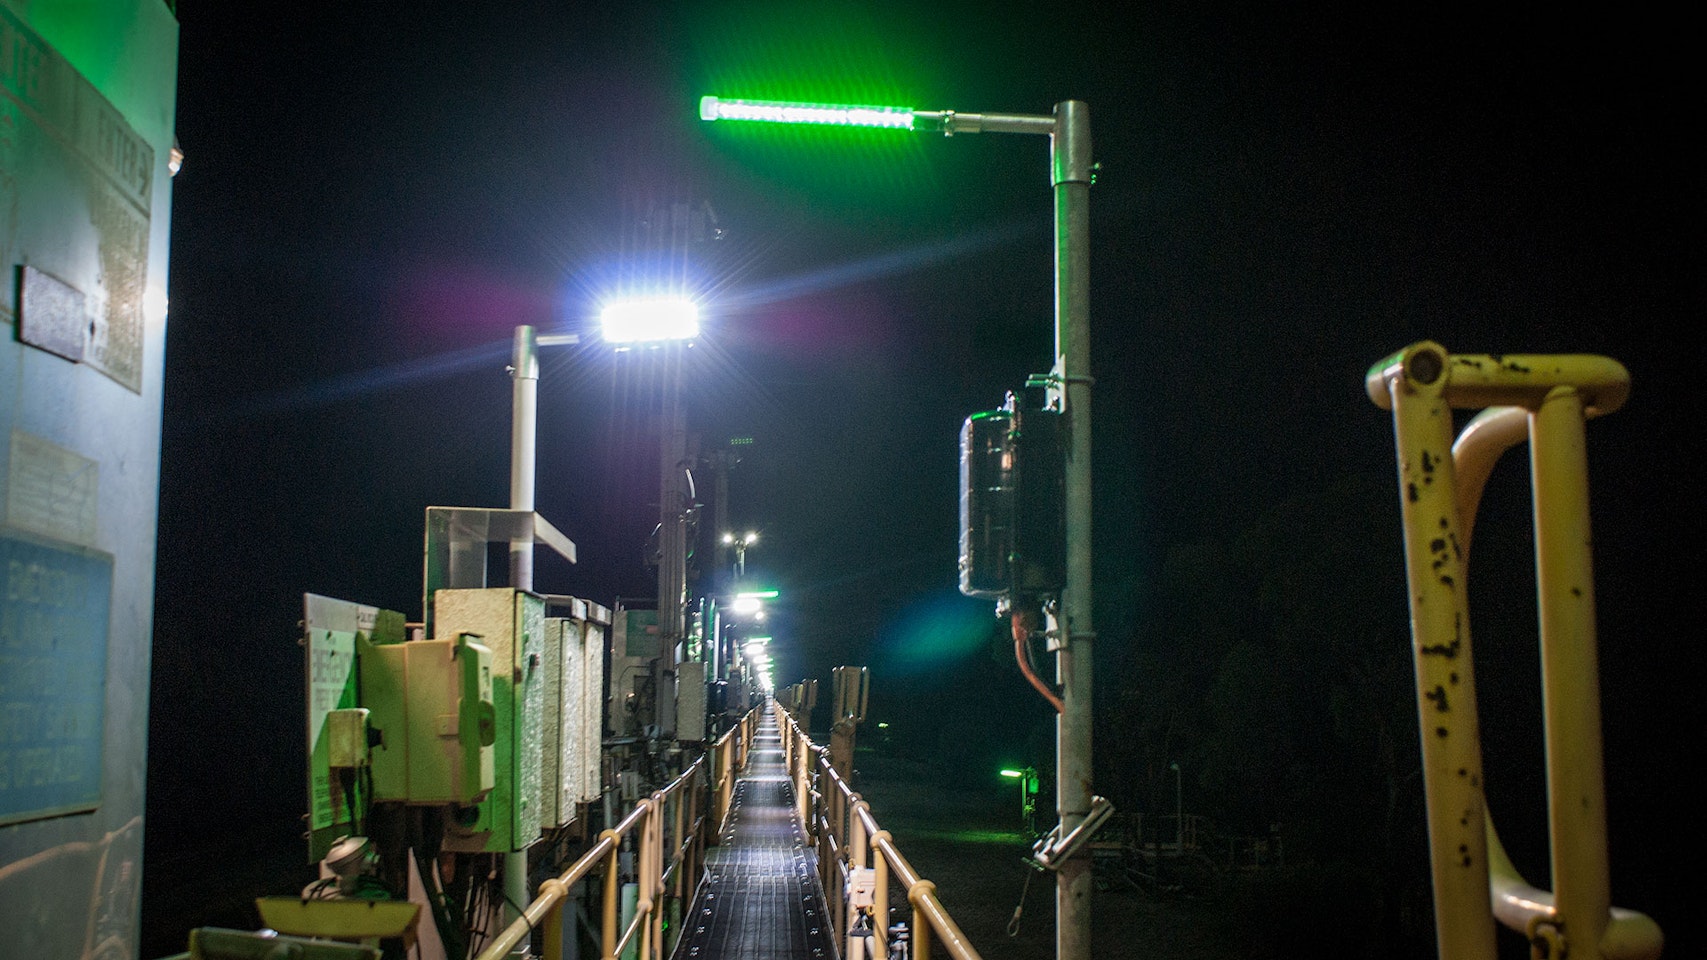 Eye Wash Station LED Safety Beacon Light in application, installed on an axis transfer station on a copper refinery